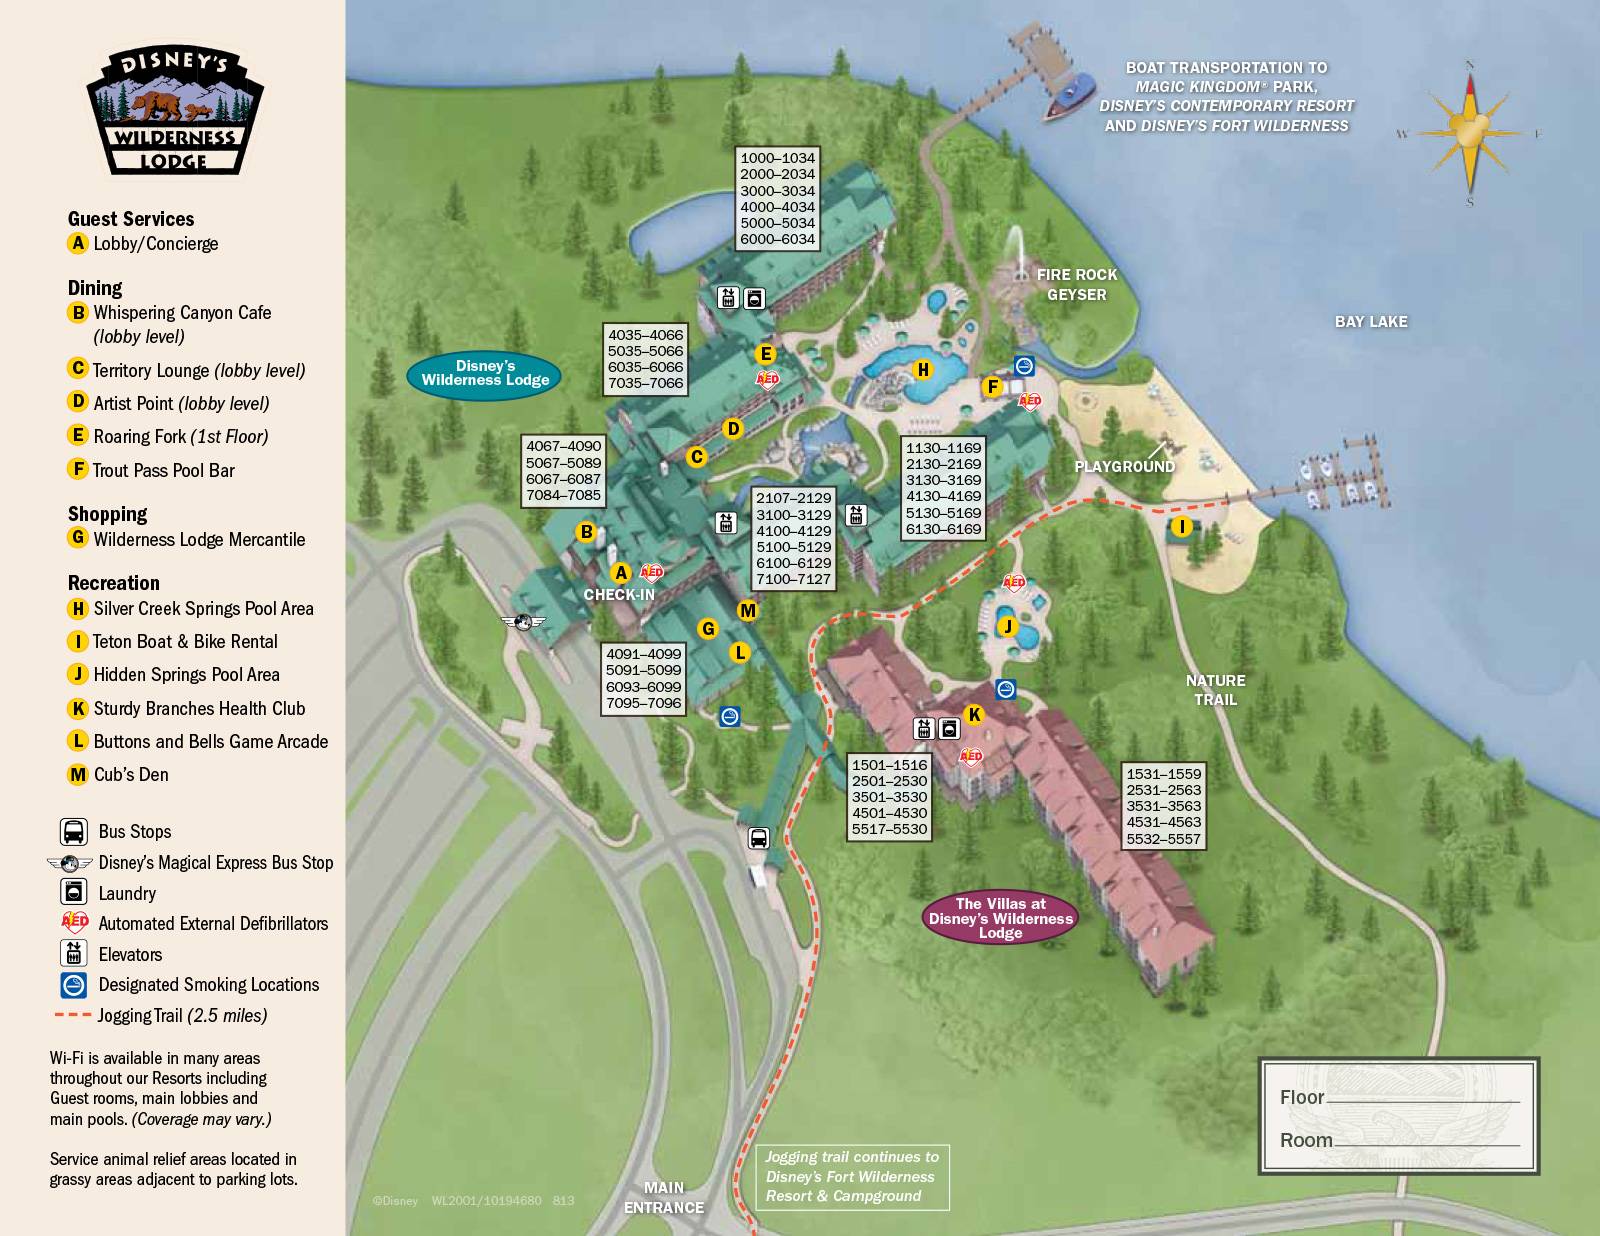 2013 Wilderness Lodge guide map